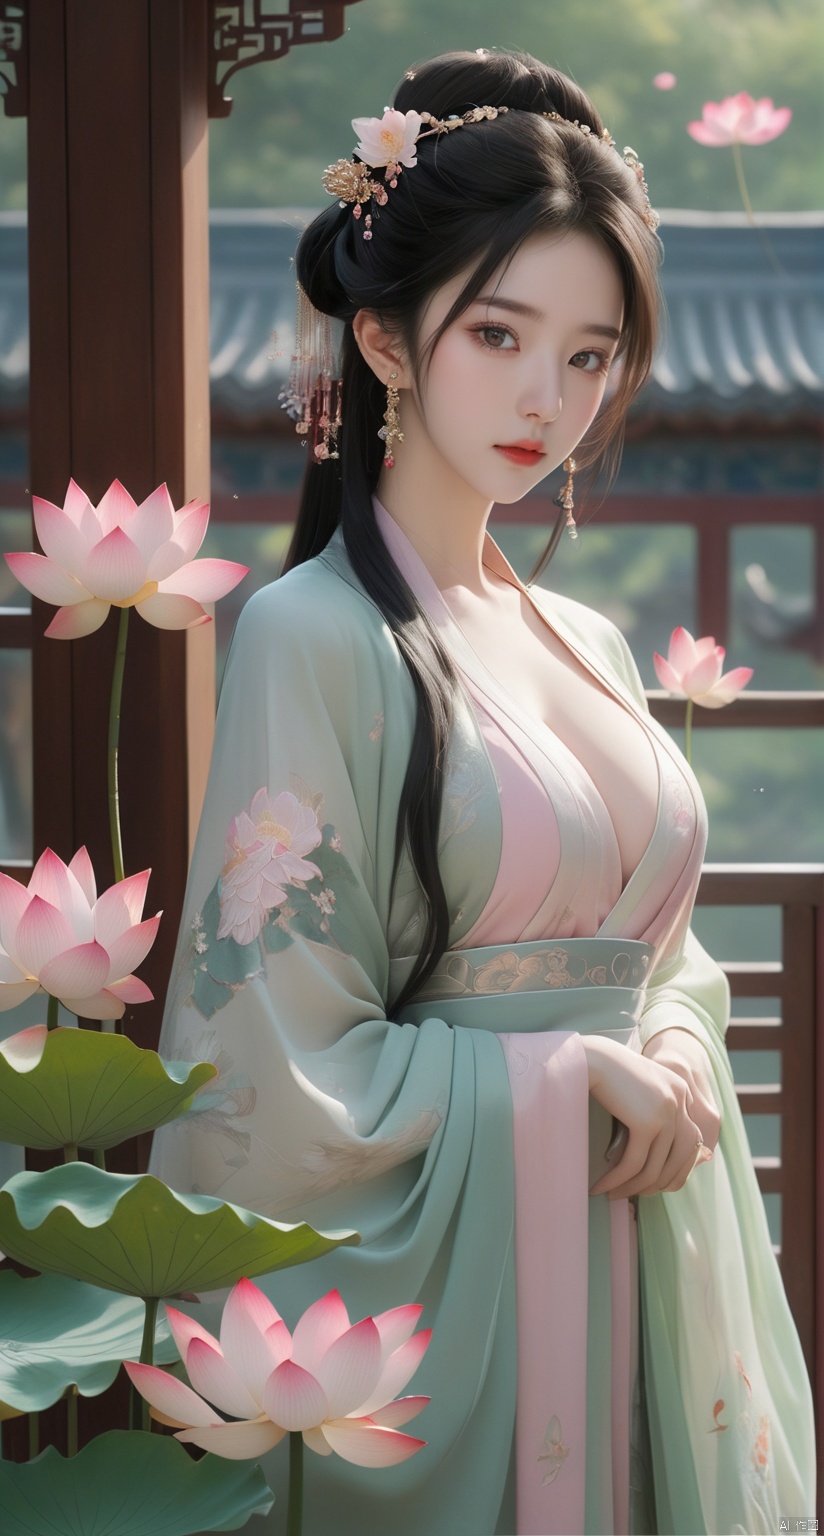  Best quality, Realistic, photorealistic, masterpiece, extremely detailed CG unity 8k wallpaper, best illumination, best shadow, huge filesize ,(huge breasts:2) incredibly absurdres, absurdres, looking at viewer, transparent, smog, gauze, vase, petals, room, ancient Chinese style, detailed background, wide shot background,
(((1gilr,black hair))),(Sitting on the lotus pond porch:1.39) ,(huge breasts:2.1),(A pond full of pink lotus flowers:1.3),close up of 1girl,Hairpins,hair ornament,hair wings,slim,narrow waist,(huge breasts:2.3),perfect eyes,beautiful perfect face,pleasant smile,perfect female figure,detailed skin,charming,alluring,seductive,erotic,enchanting,delicate pattern,detailed complex and rich exquisite clothing detail,delicate intricate fabrics,
Morning Serenade In the gentle morning glow, (a woman in a pink lotus-patterned Hanfu stands in an indoor courtyard:1.26),(Chinese traditional dragon and phoenix embroidered Hanfu:1.3), admiring the tranquil garden scenery. The lotus-patterned Hanfu, embellished with silver-thread embroidery, is softly illuminated by the morning light. The light mint green Hanfu imparts a sense of calm and freshness, adorned with delicate lotus patterns, with a blurred background to enhance the peaceful atmosphere,(huge breasts:2.3), puregirl, g009